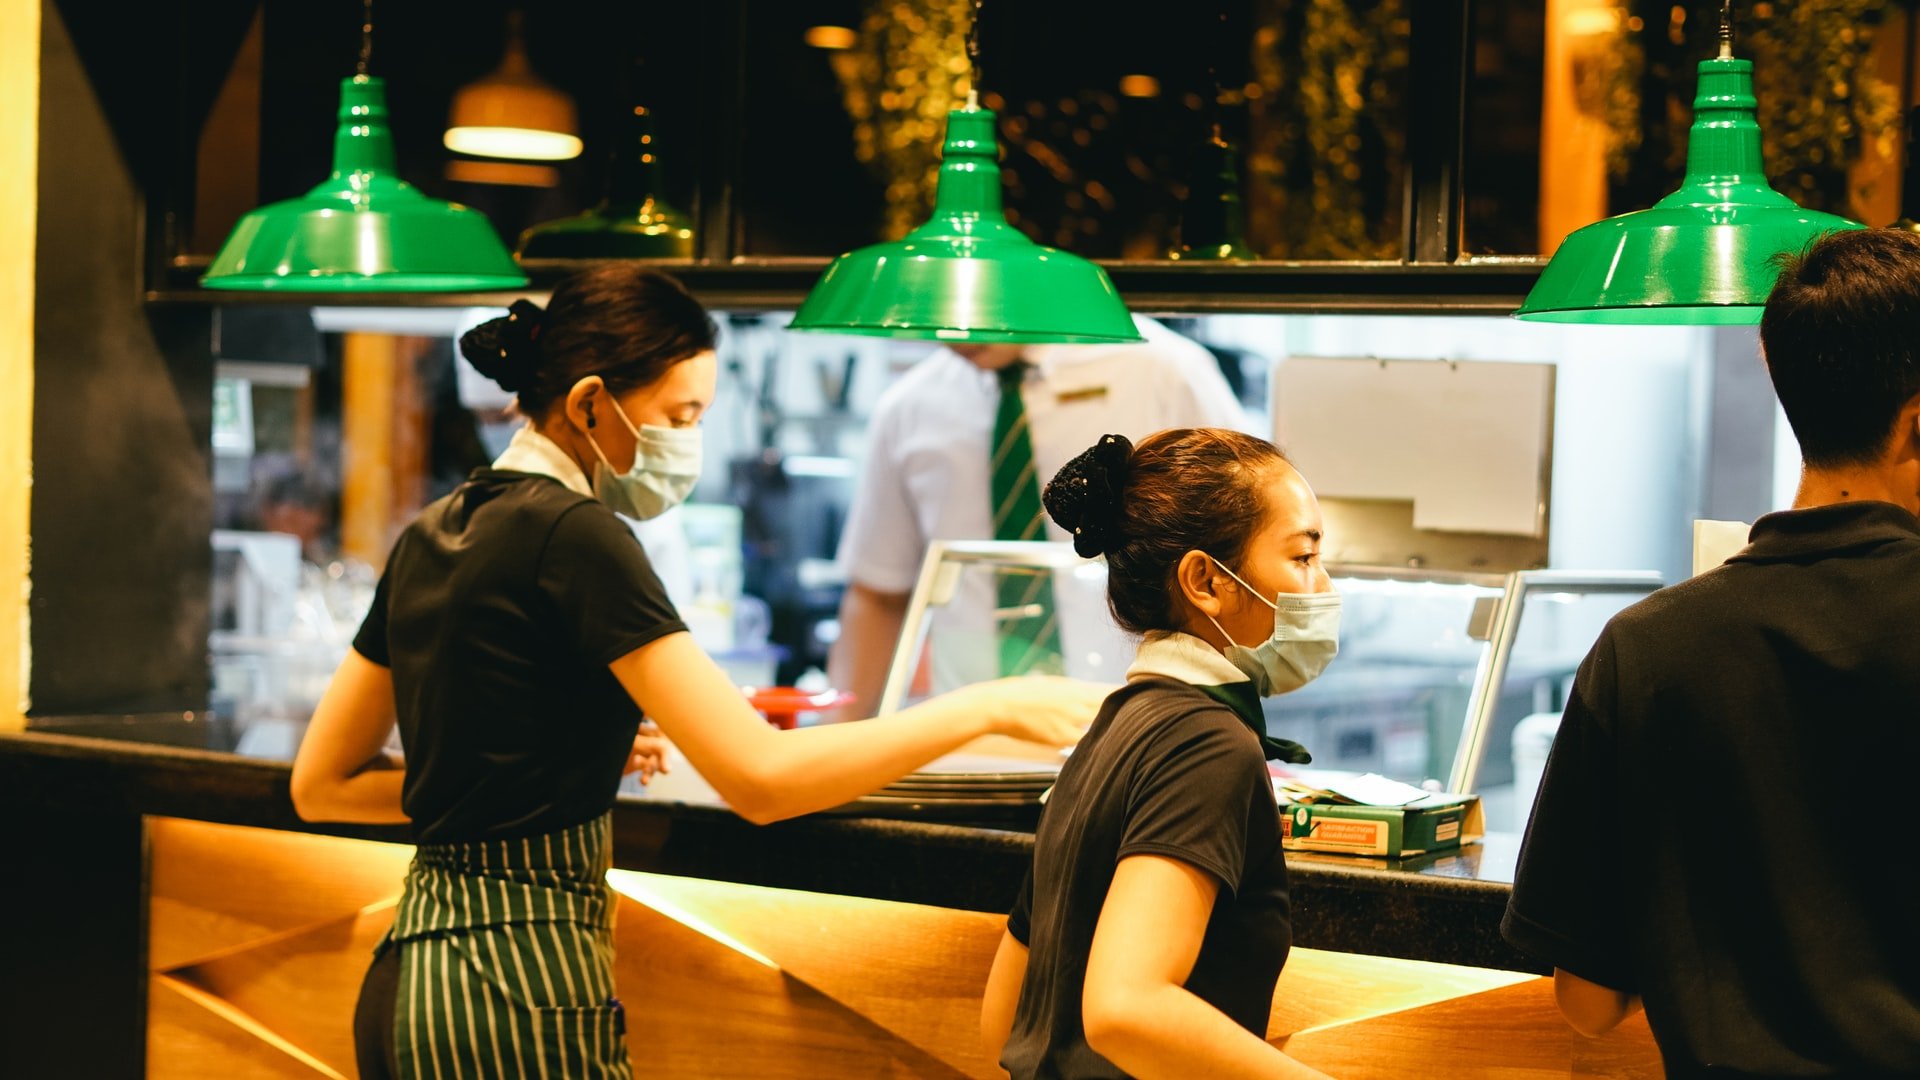 Sonya worked as a waitress at a restaurant. | Source: Unsplash